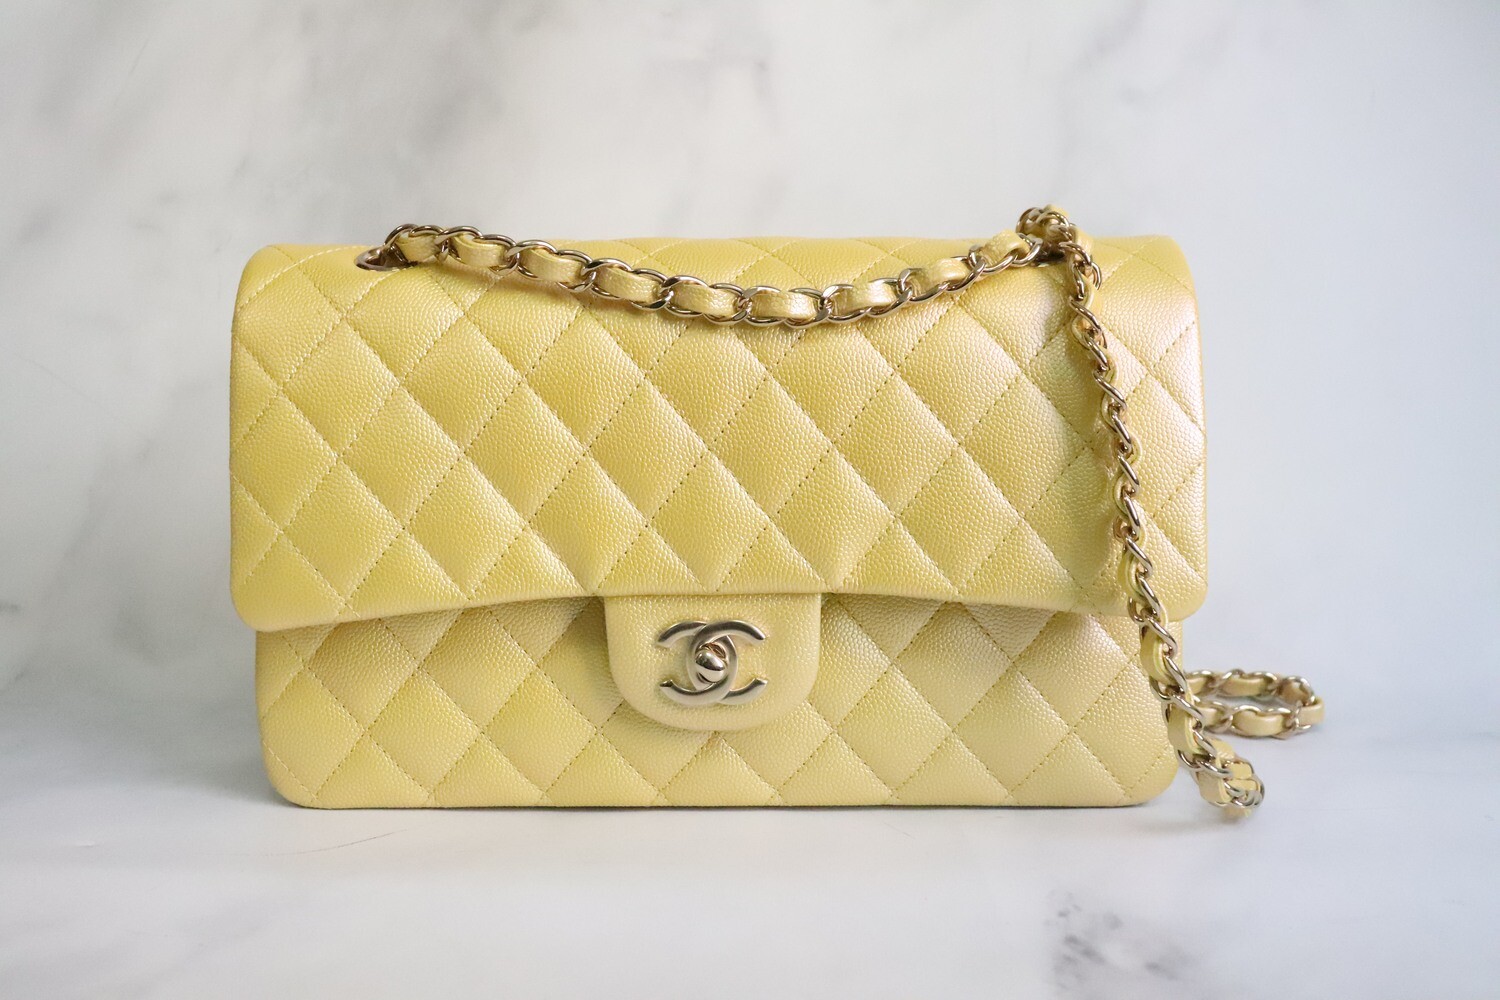 Chanel Yellow Distressed Patent Reissue 226 Flap Bag